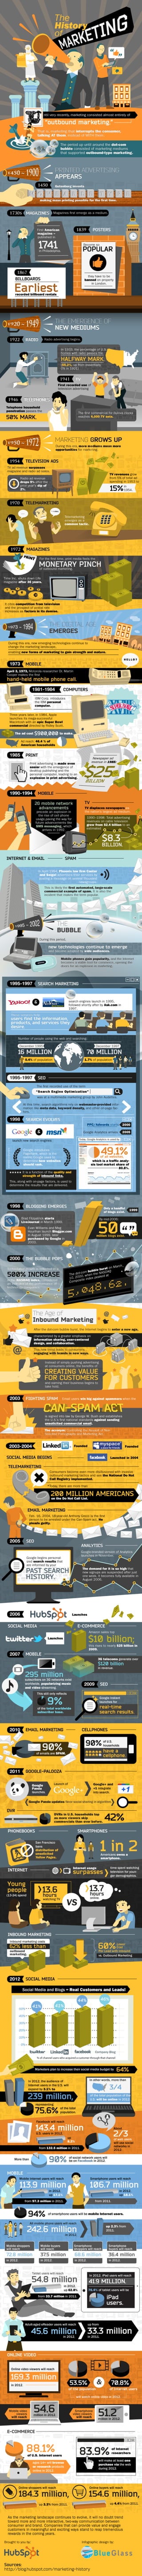 The History of Marketing Infographic